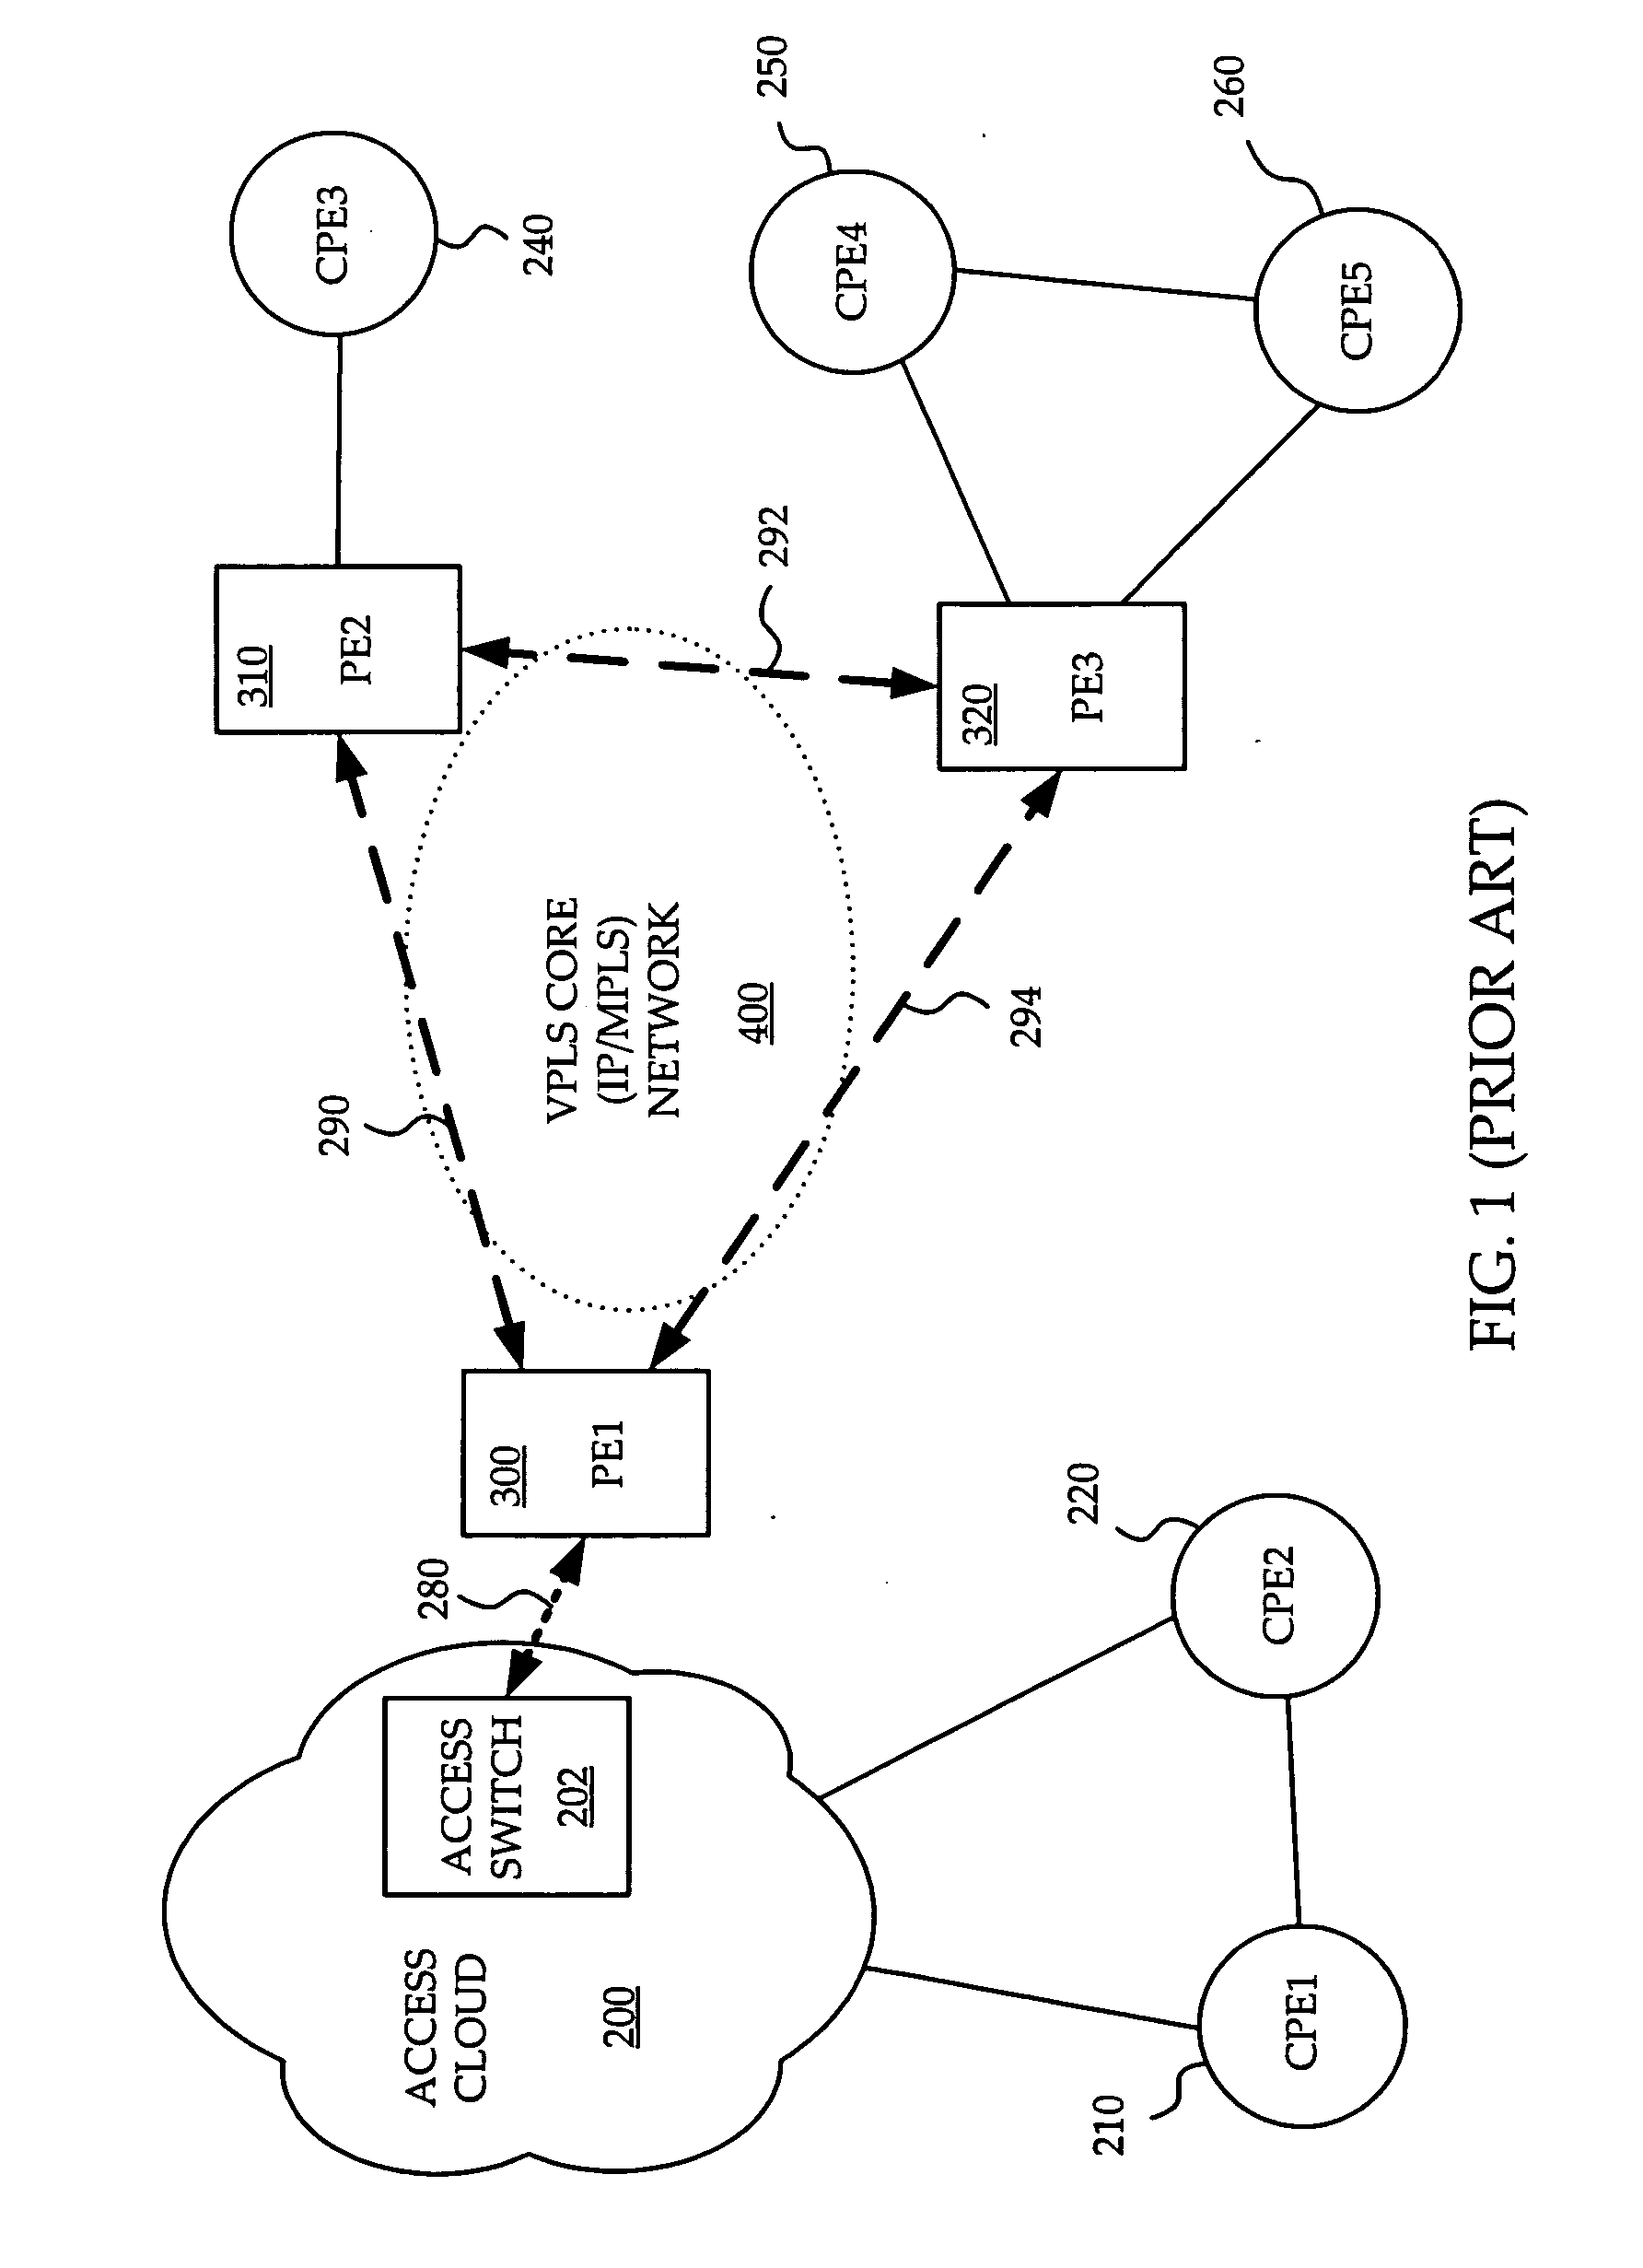 System and method for resilient VPLS over multi-nodal APS protected provider edge nodes